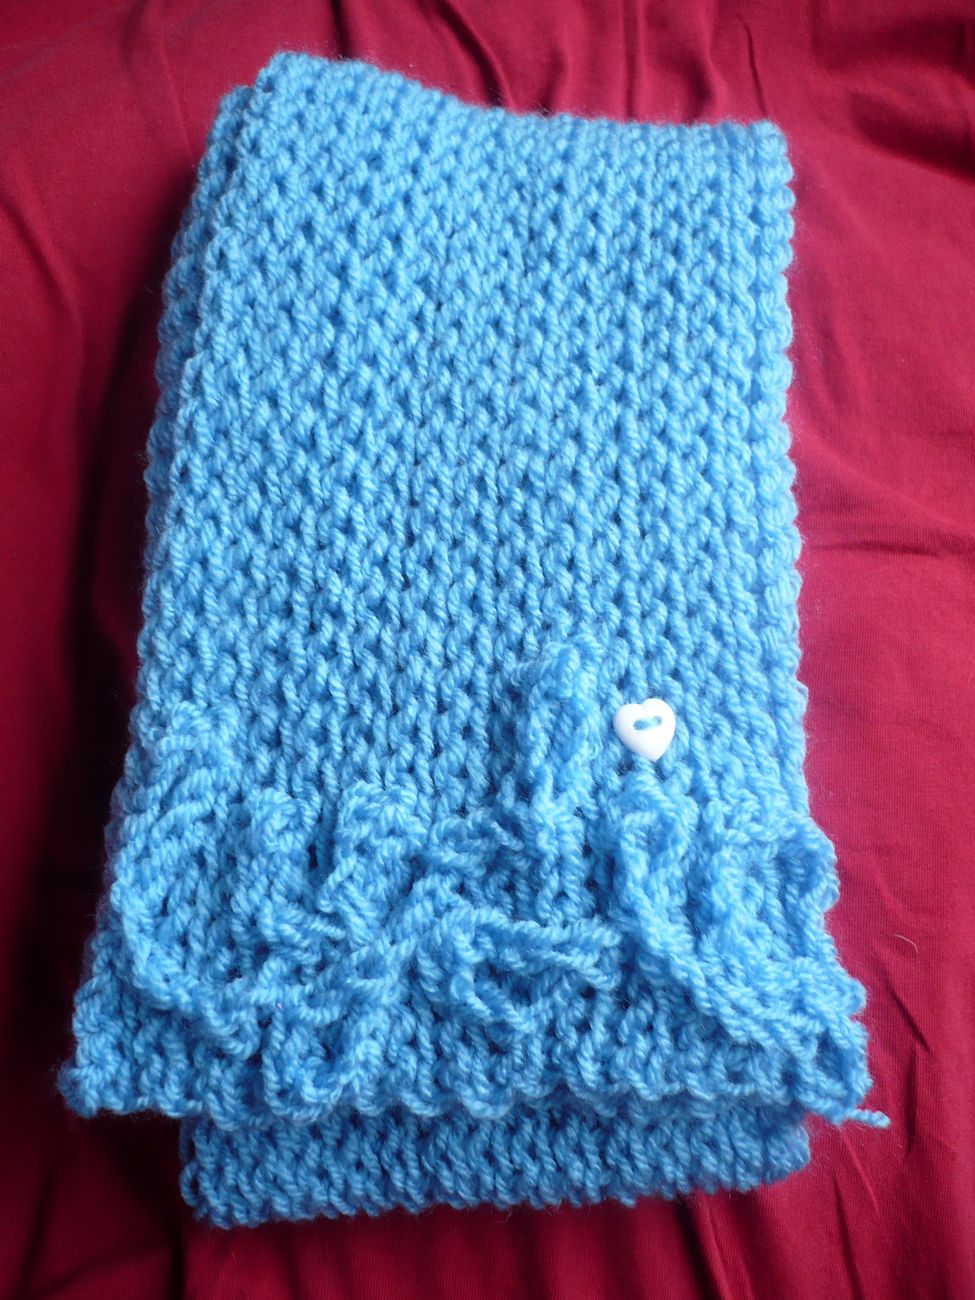 a knitted baby blue blanket on a red bed